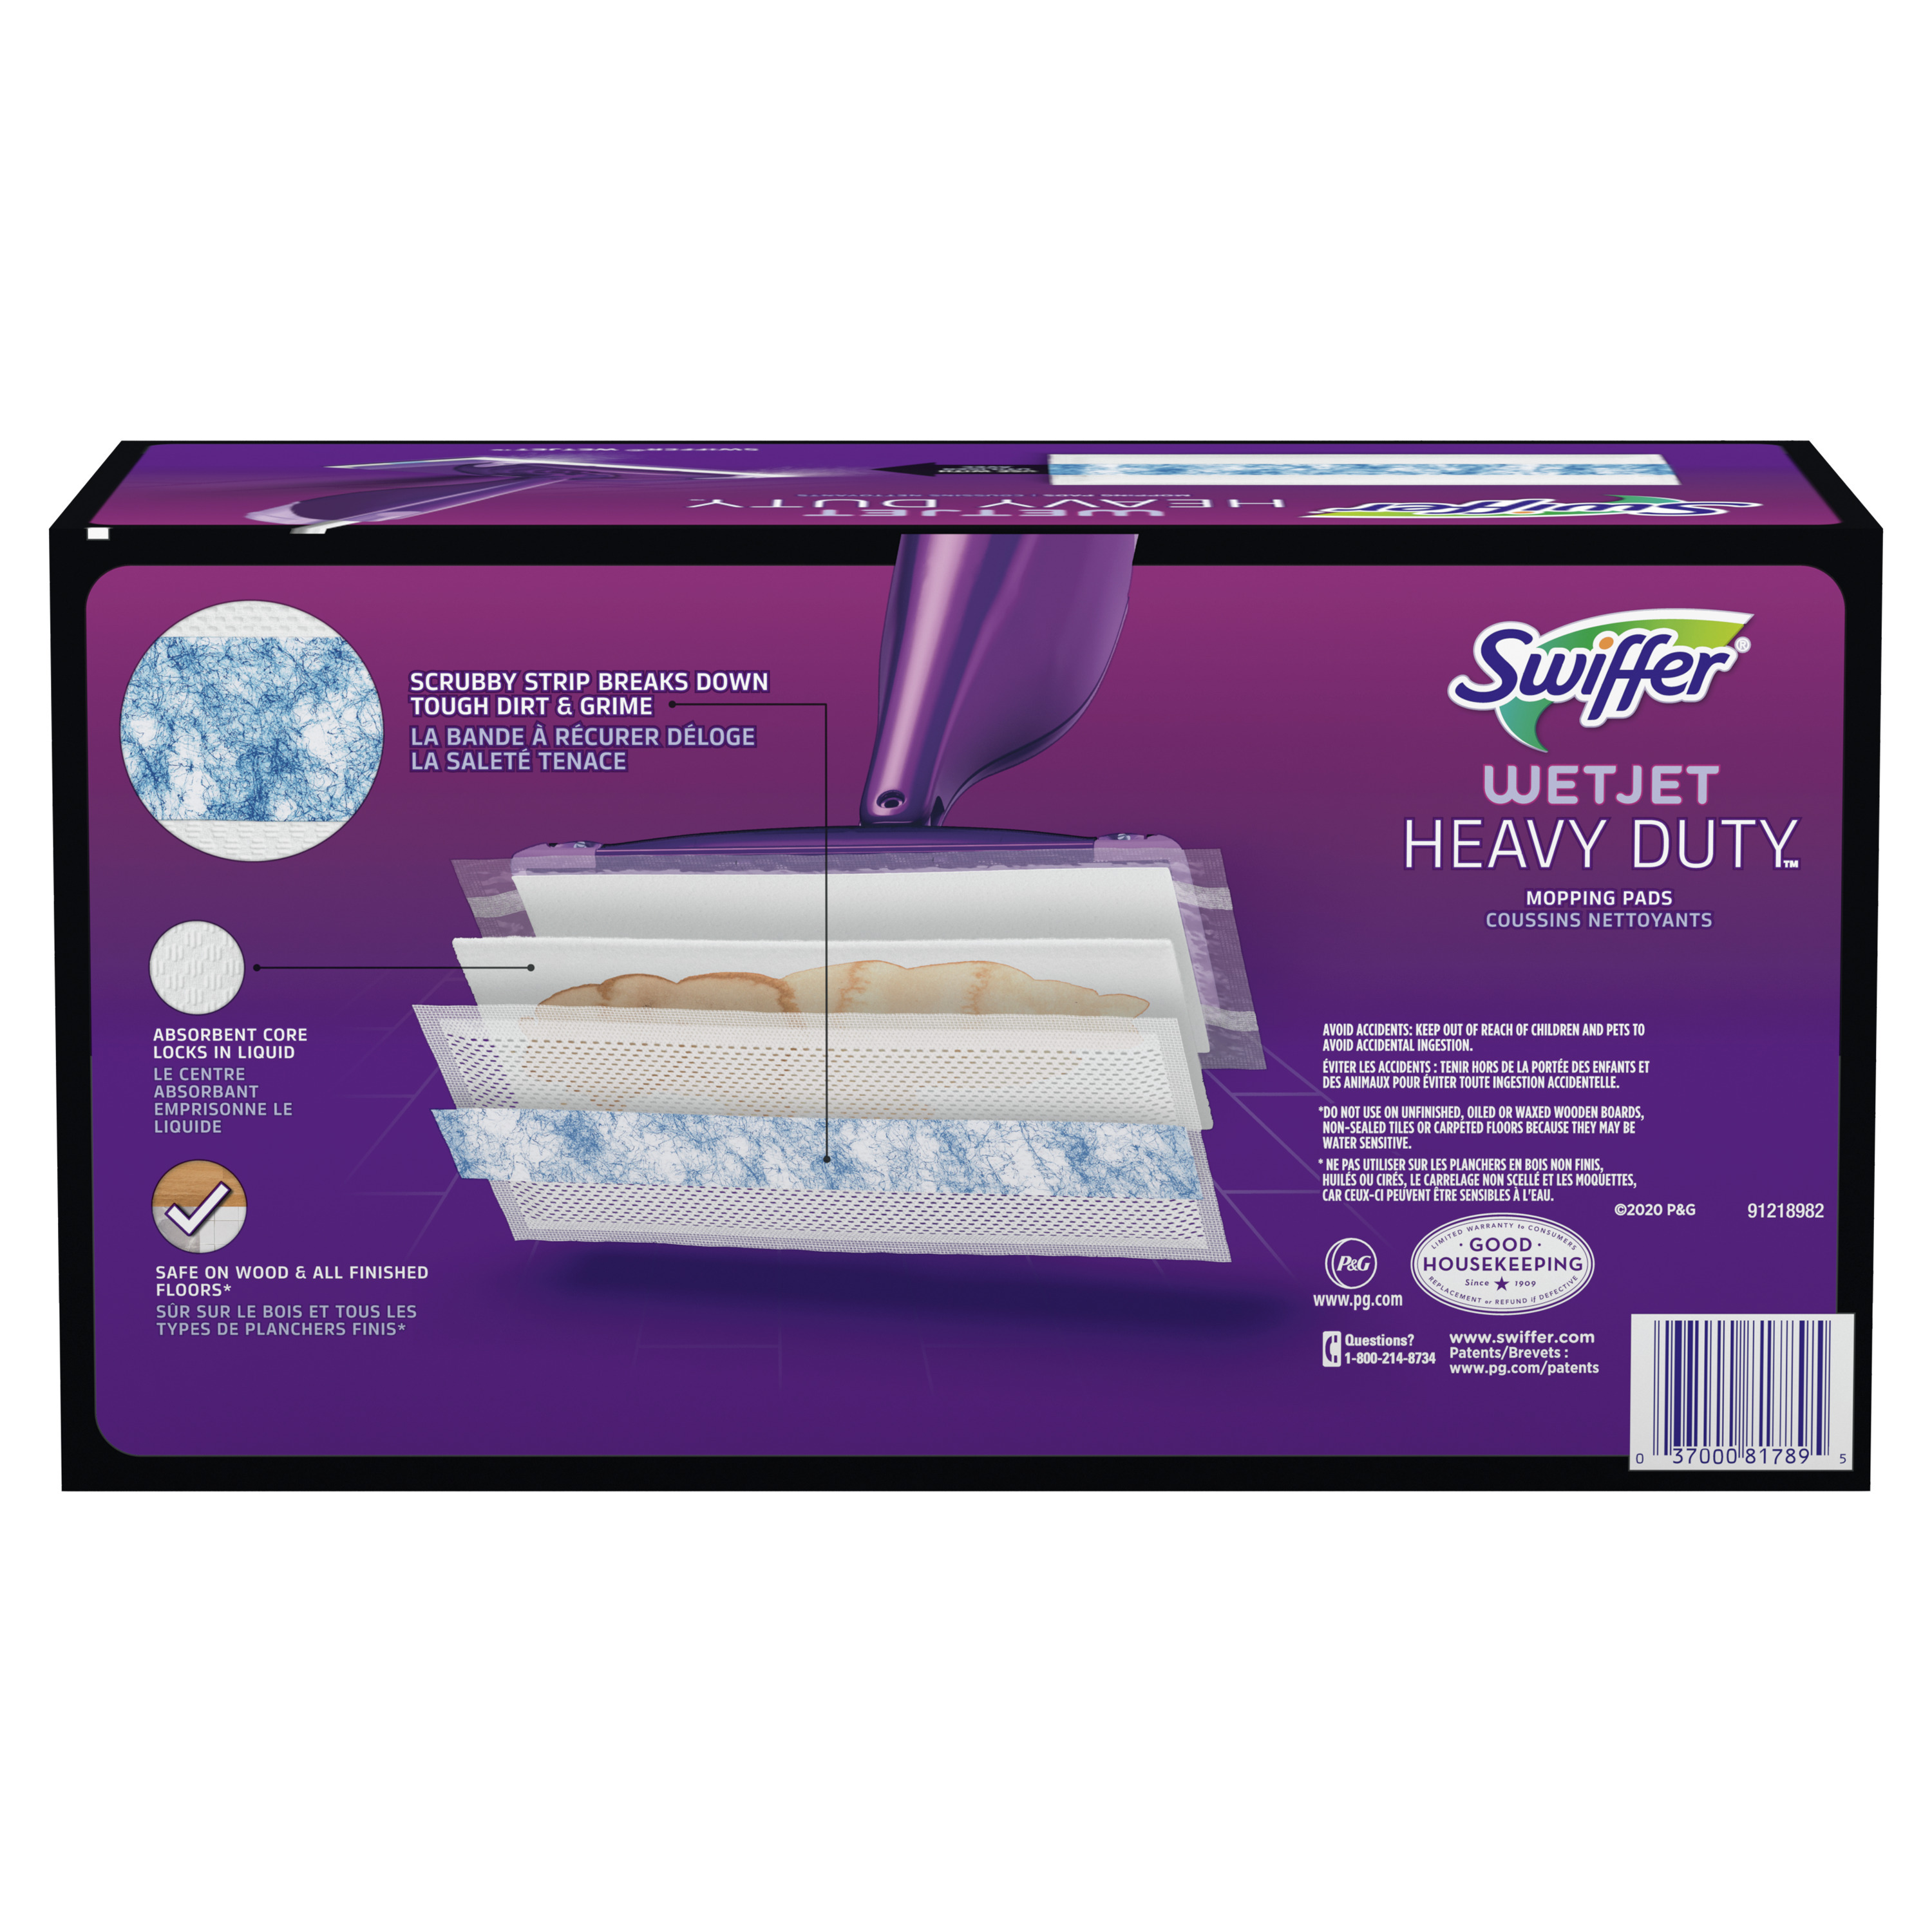 Swiffer WetJet Spray Mop Heavy Duty Mop Refills for Floor Mopping and Cleaning, All Purpose Multi-Surface Floor Cleaning Pads, 20 Count - image 10 of 10